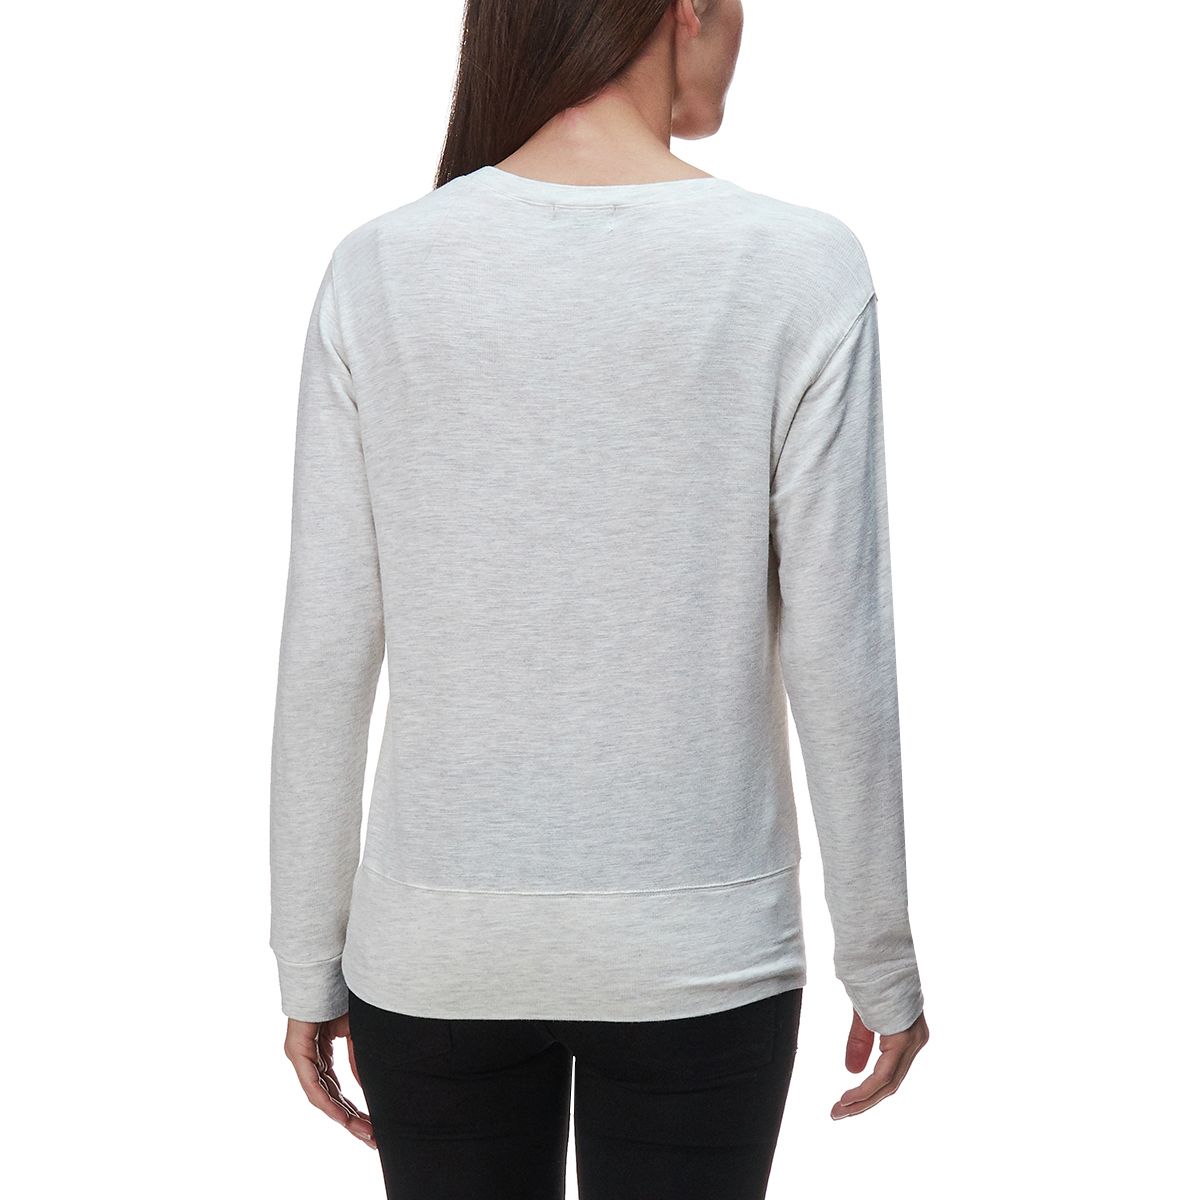 Monrow Supersoft Long-Sleeve V-Neck Top - Women's - Clothing